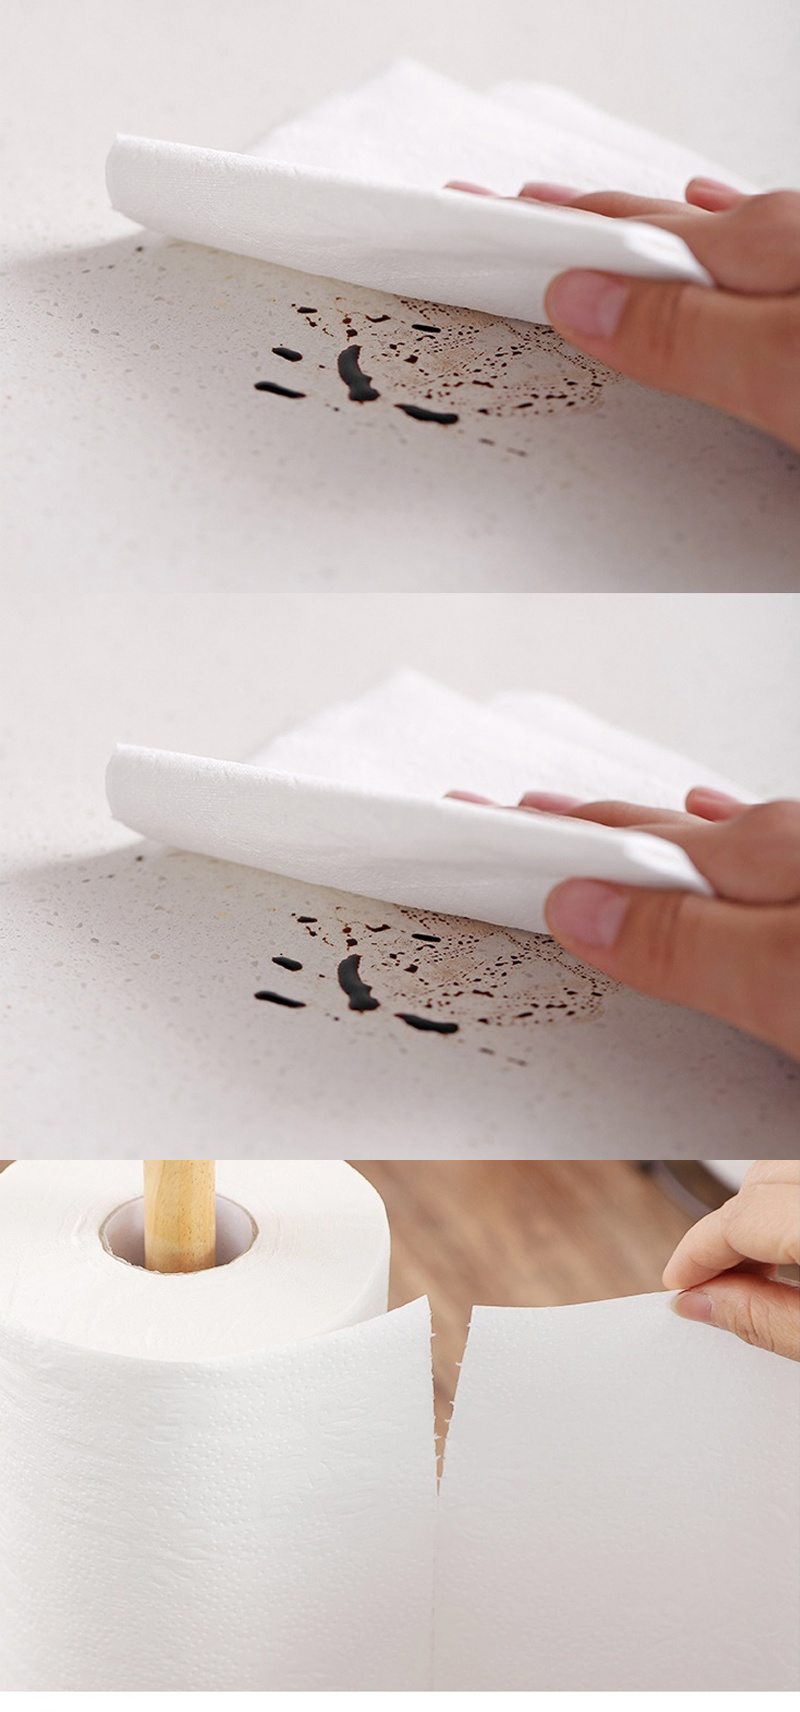 Factory Price Hand Towel Kitchen Roll Towel Paper